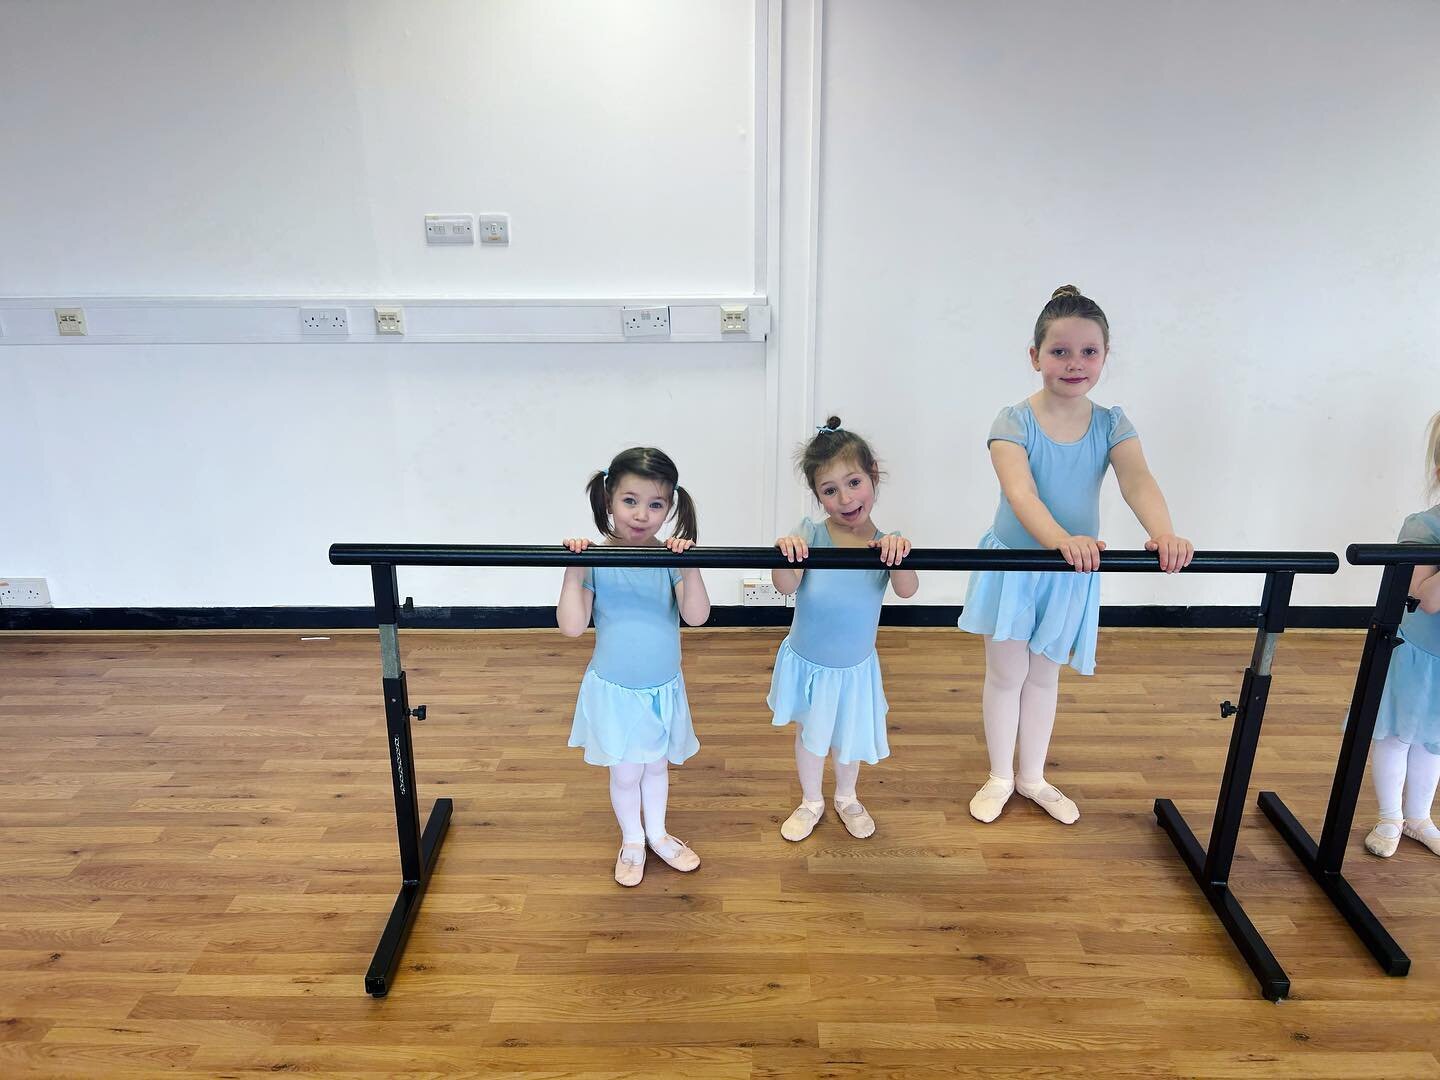 💙Not long now till we&rsquo;re back with these superstars 💙

💙 ALL TRIAL LINKS ARE NOW LIVE! Including our two NEW classes! 

💙12:15-12:45 MODERN 💙
💙12:45-1:15 G2 Ballet💙

💙Modern ages are 3+💙
💙 G2 ballet is age 6+💙

- link in our bio to b